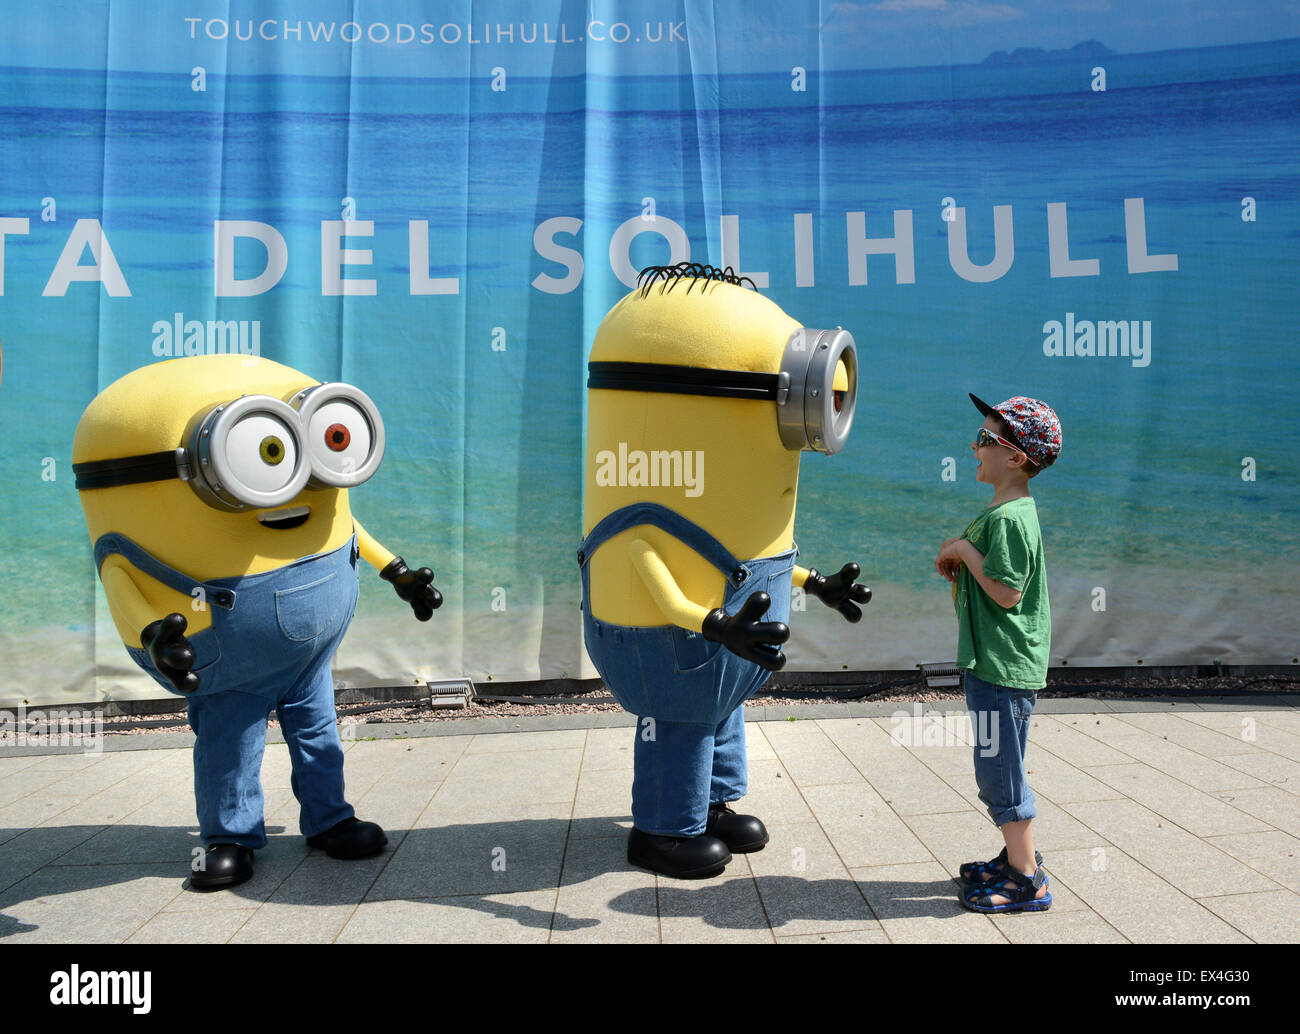 Child boy meets interacts with the Minions at Touchwood Shopping Centre Stock Photo